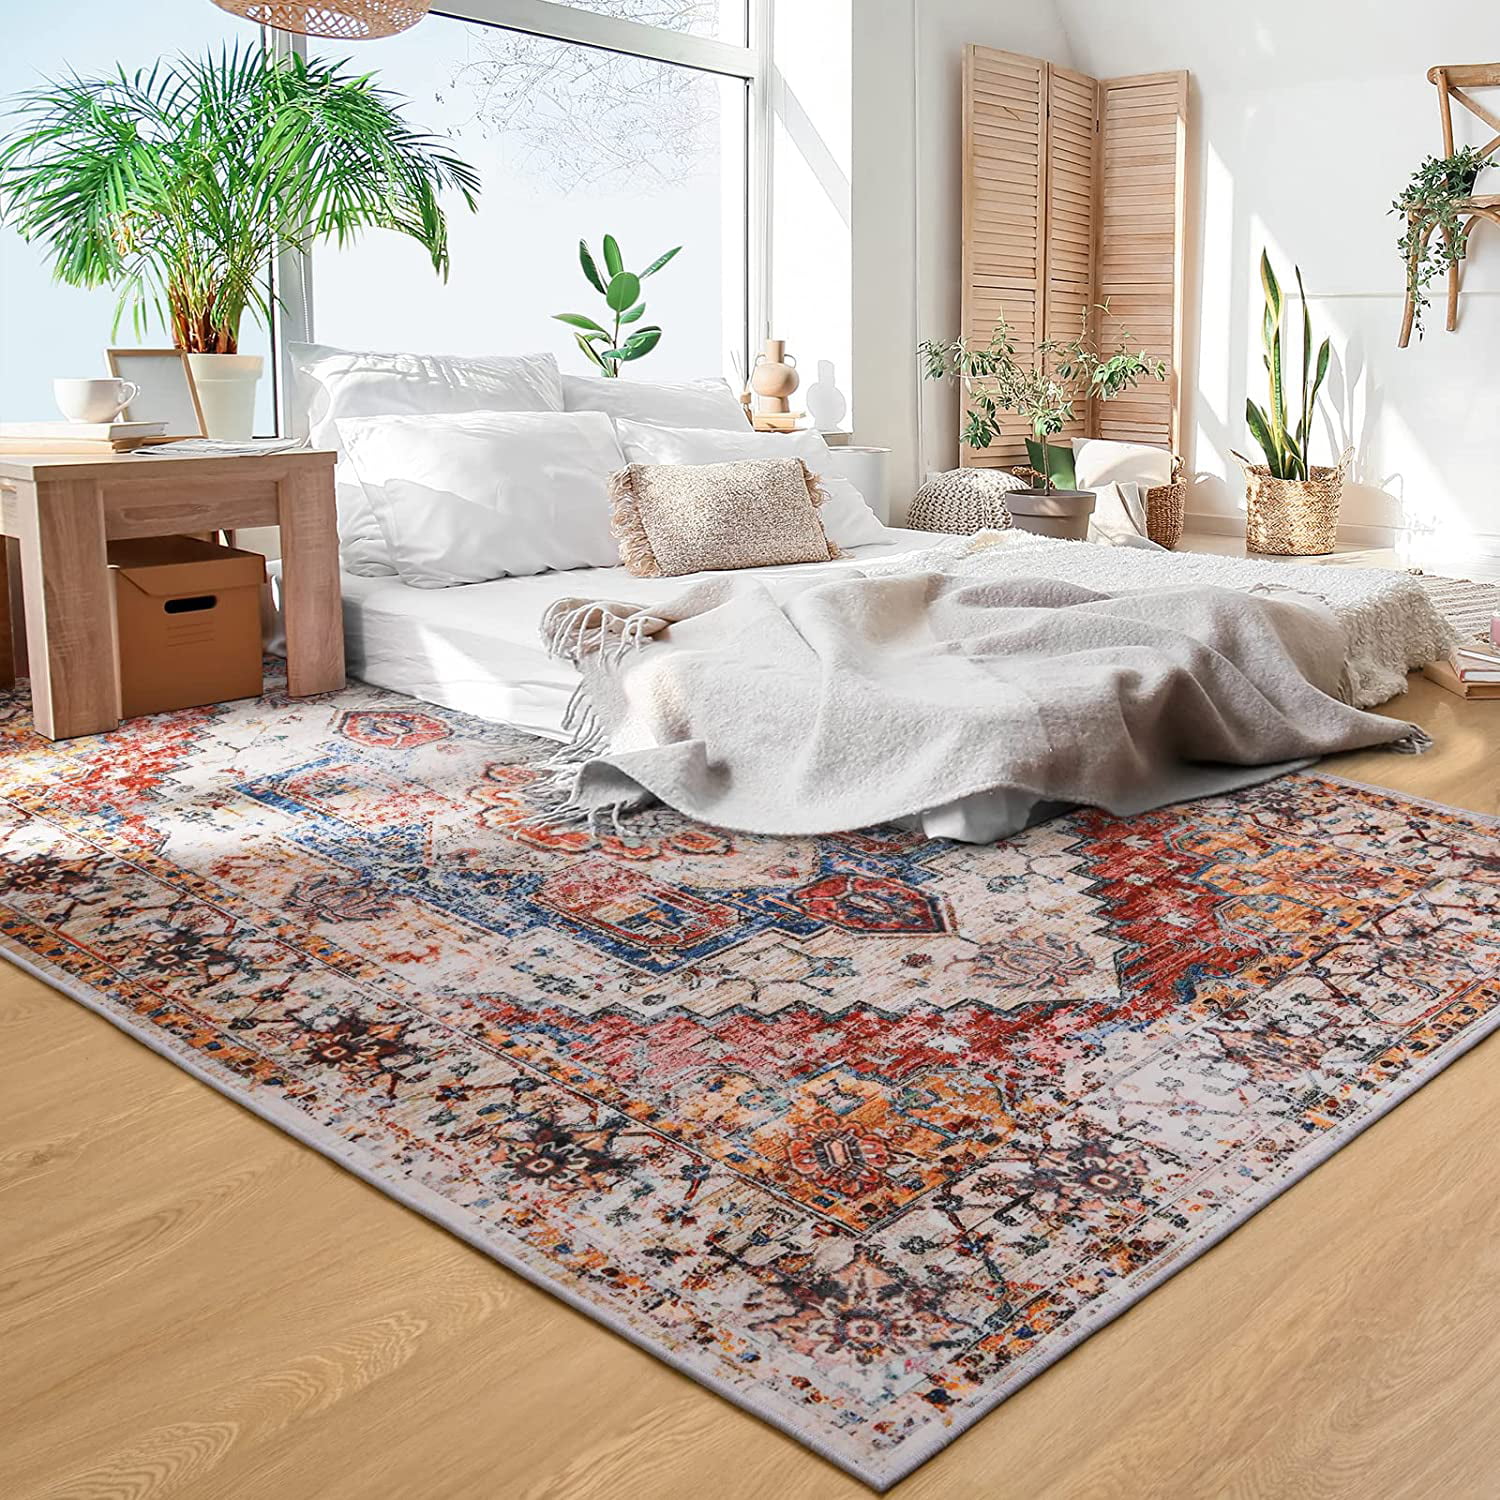 Othilic Vintage Bohemian Area Rug, 3x5 Washable Rug Boho Entry Rug Indoor  Non-Slip, Distressed Floral Soft Accent Throw Rugs for Living Room Bedroom